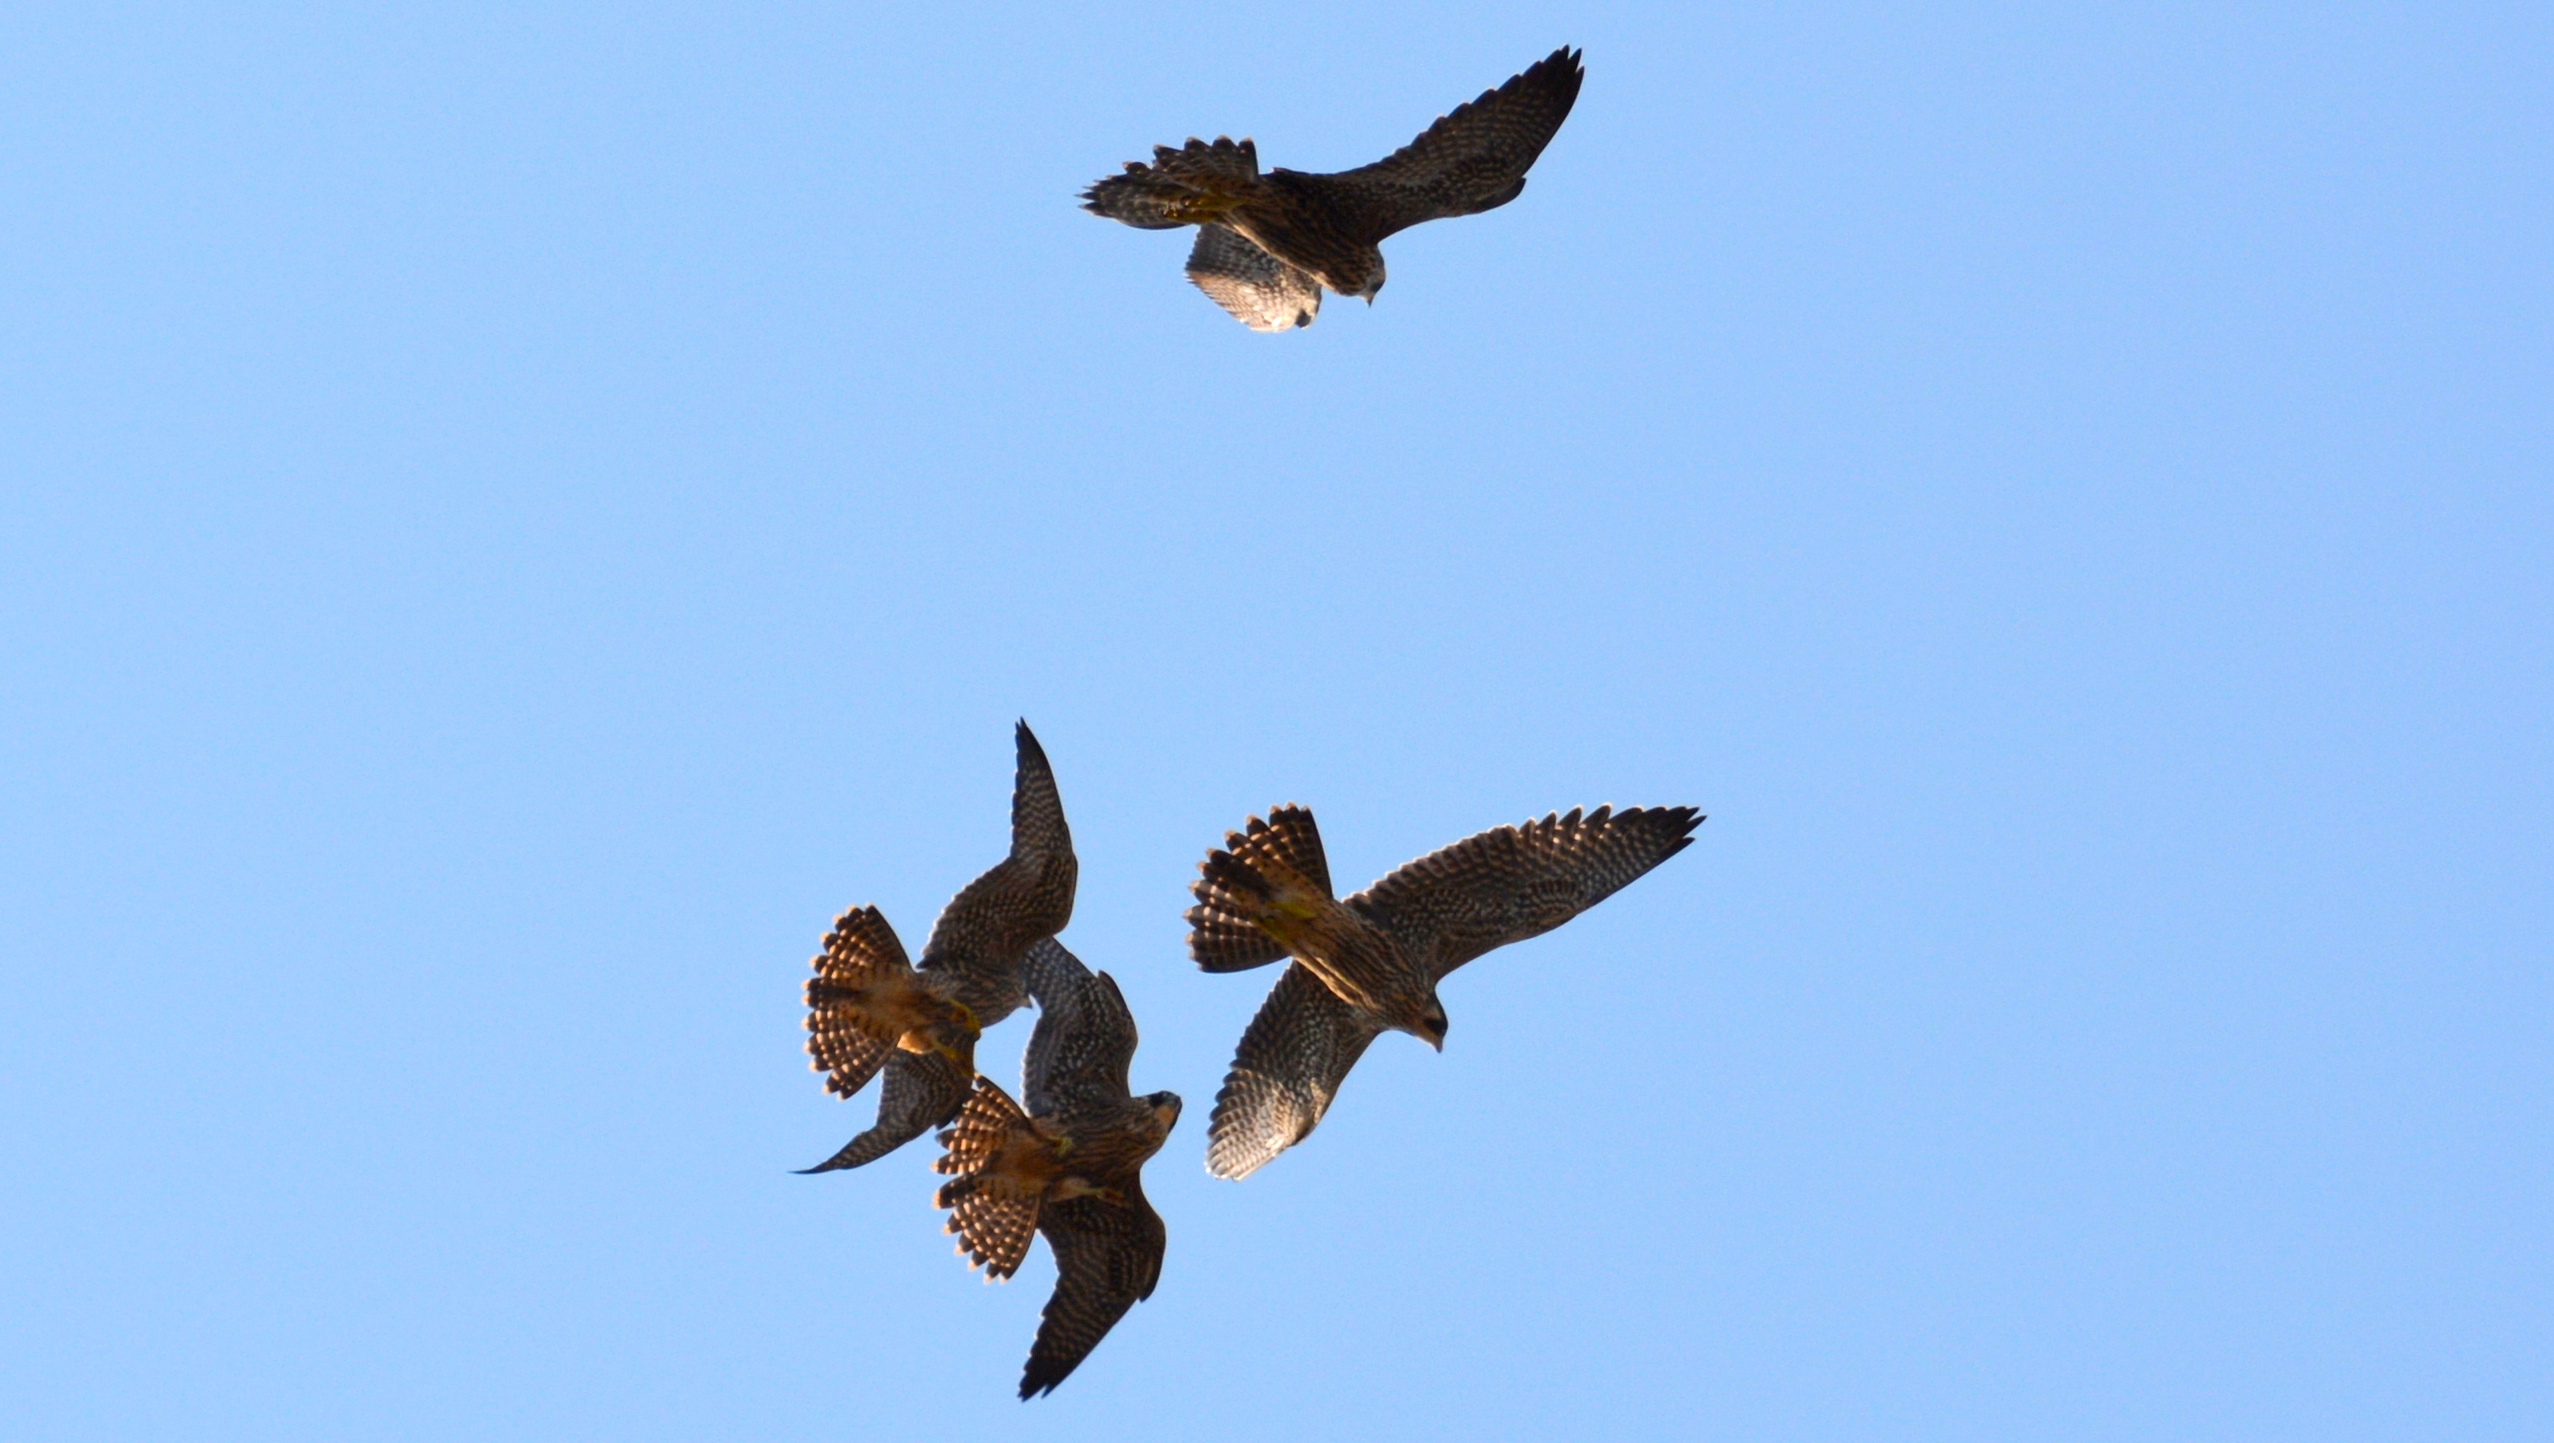 All four siblings fly and spar over the downtown area this morning 